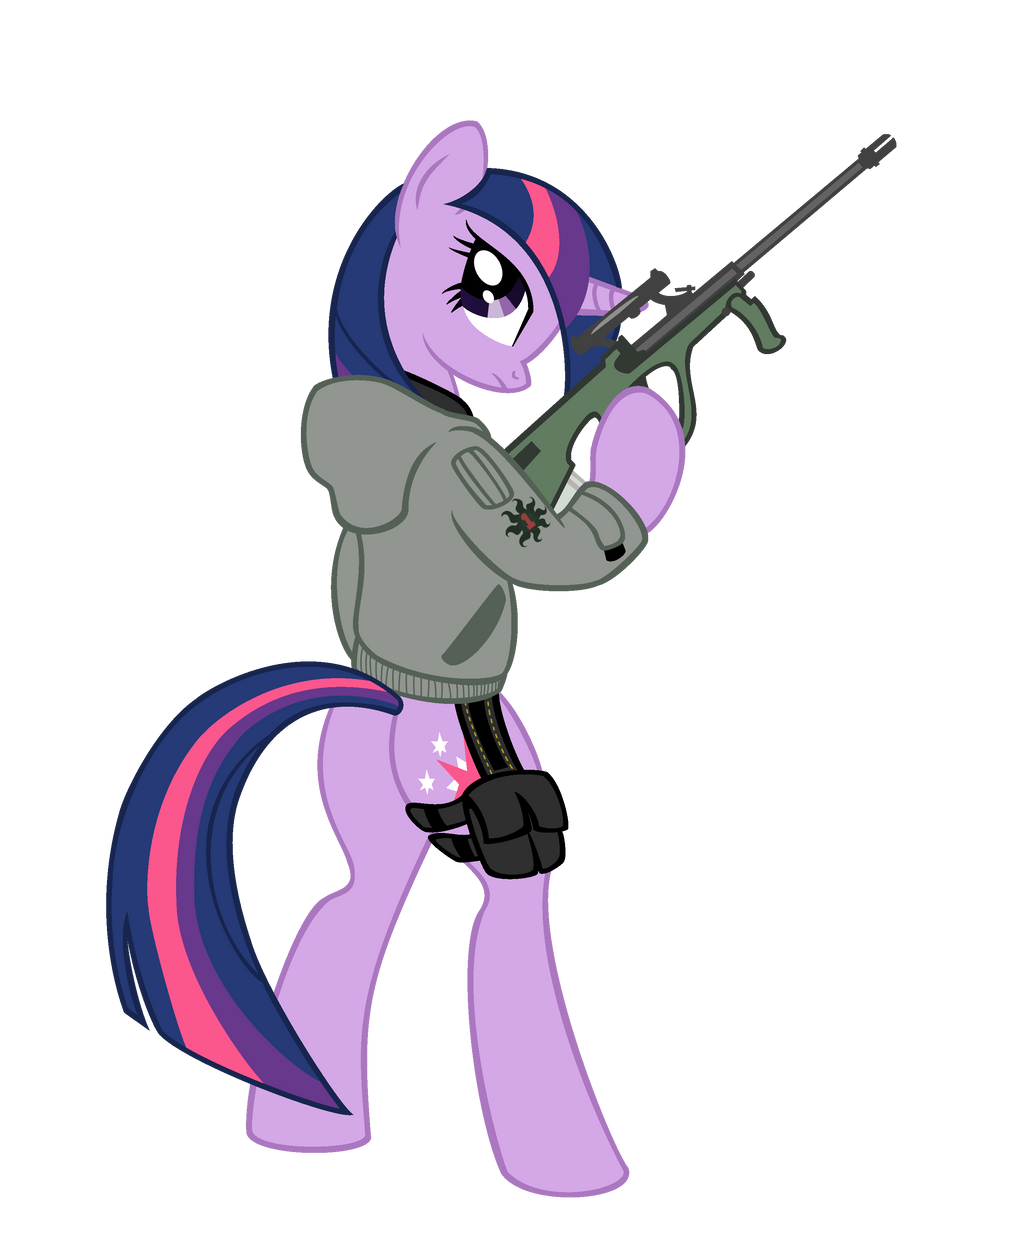 twilight_sparkle_by_shadawg-d4qb4kd.png